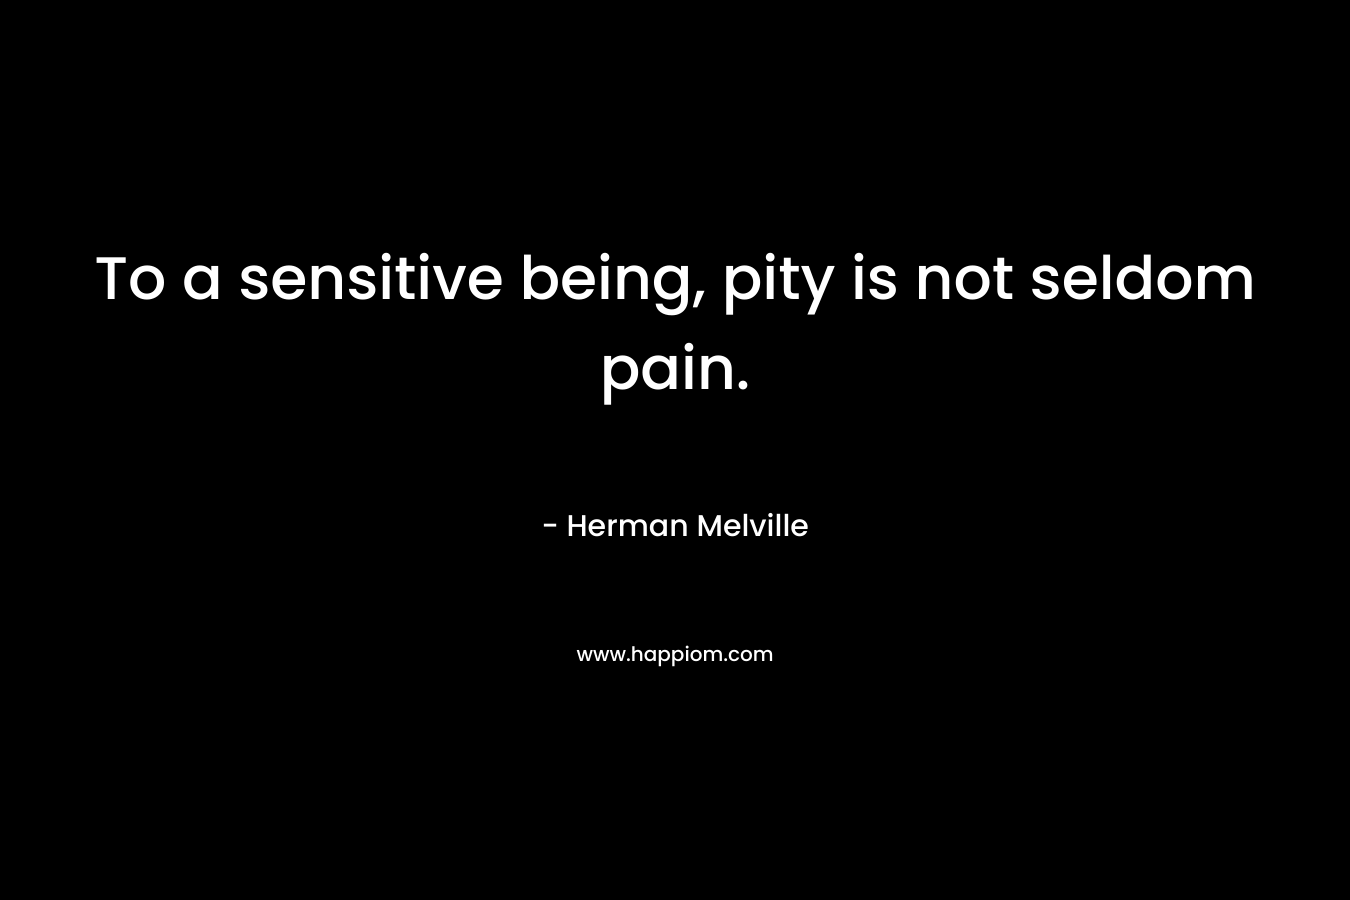 To a sensitive being, pity is not seldom pain. – Herman Melville